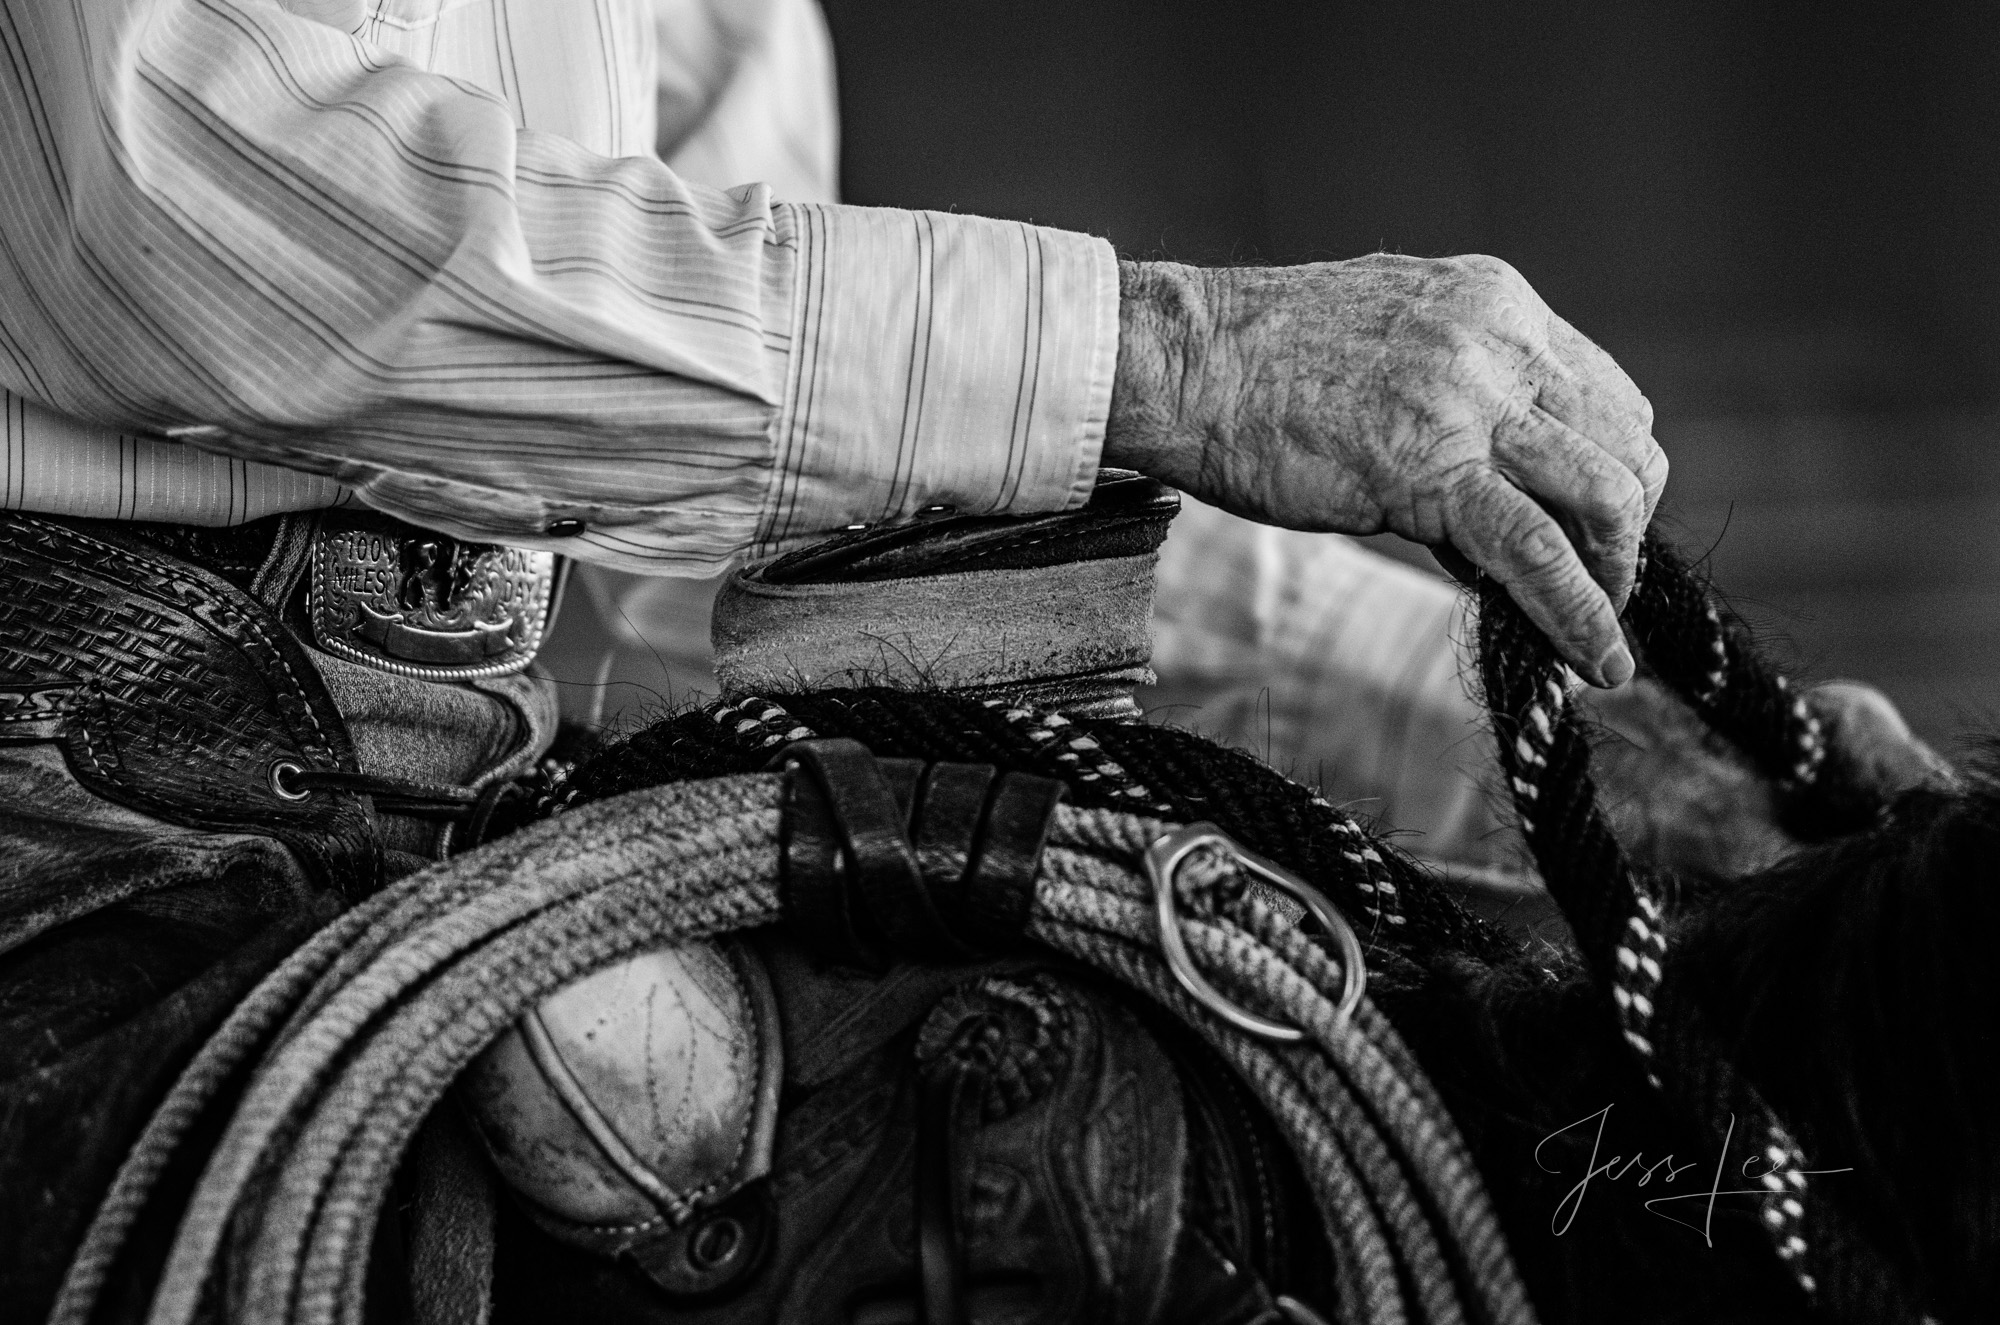 Fine Art Limited Edition Photo Prints of Cowboys, Horses, and life in the West.  Cowboy pictures in black and white. In the Hands...